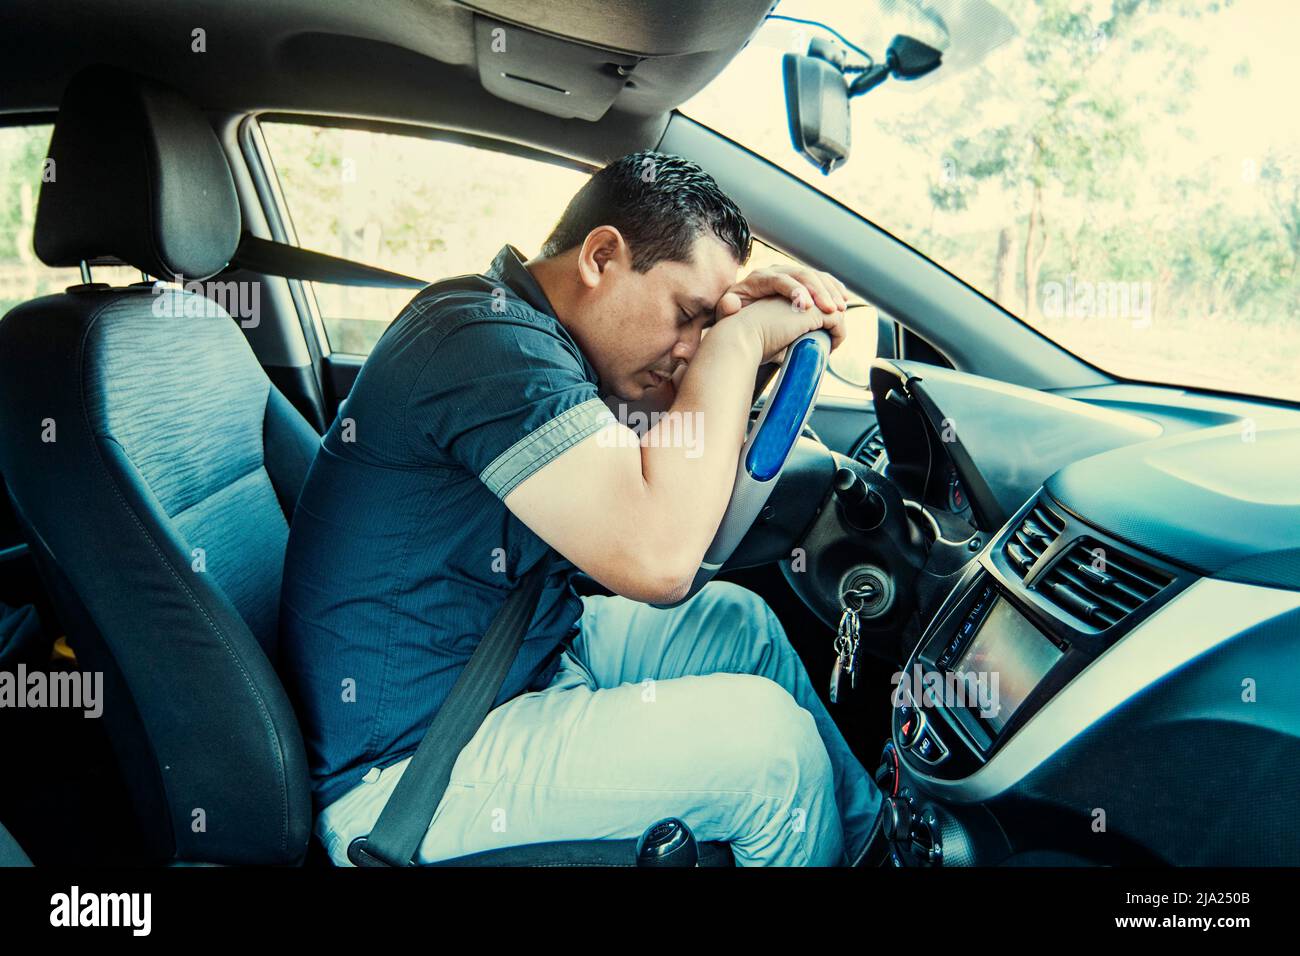 A tired driver asleep at the wheel, concept of man tired of driving. A man driver asleep at the wheel, A tired person sleeping at the wheel of the car Stock Photo